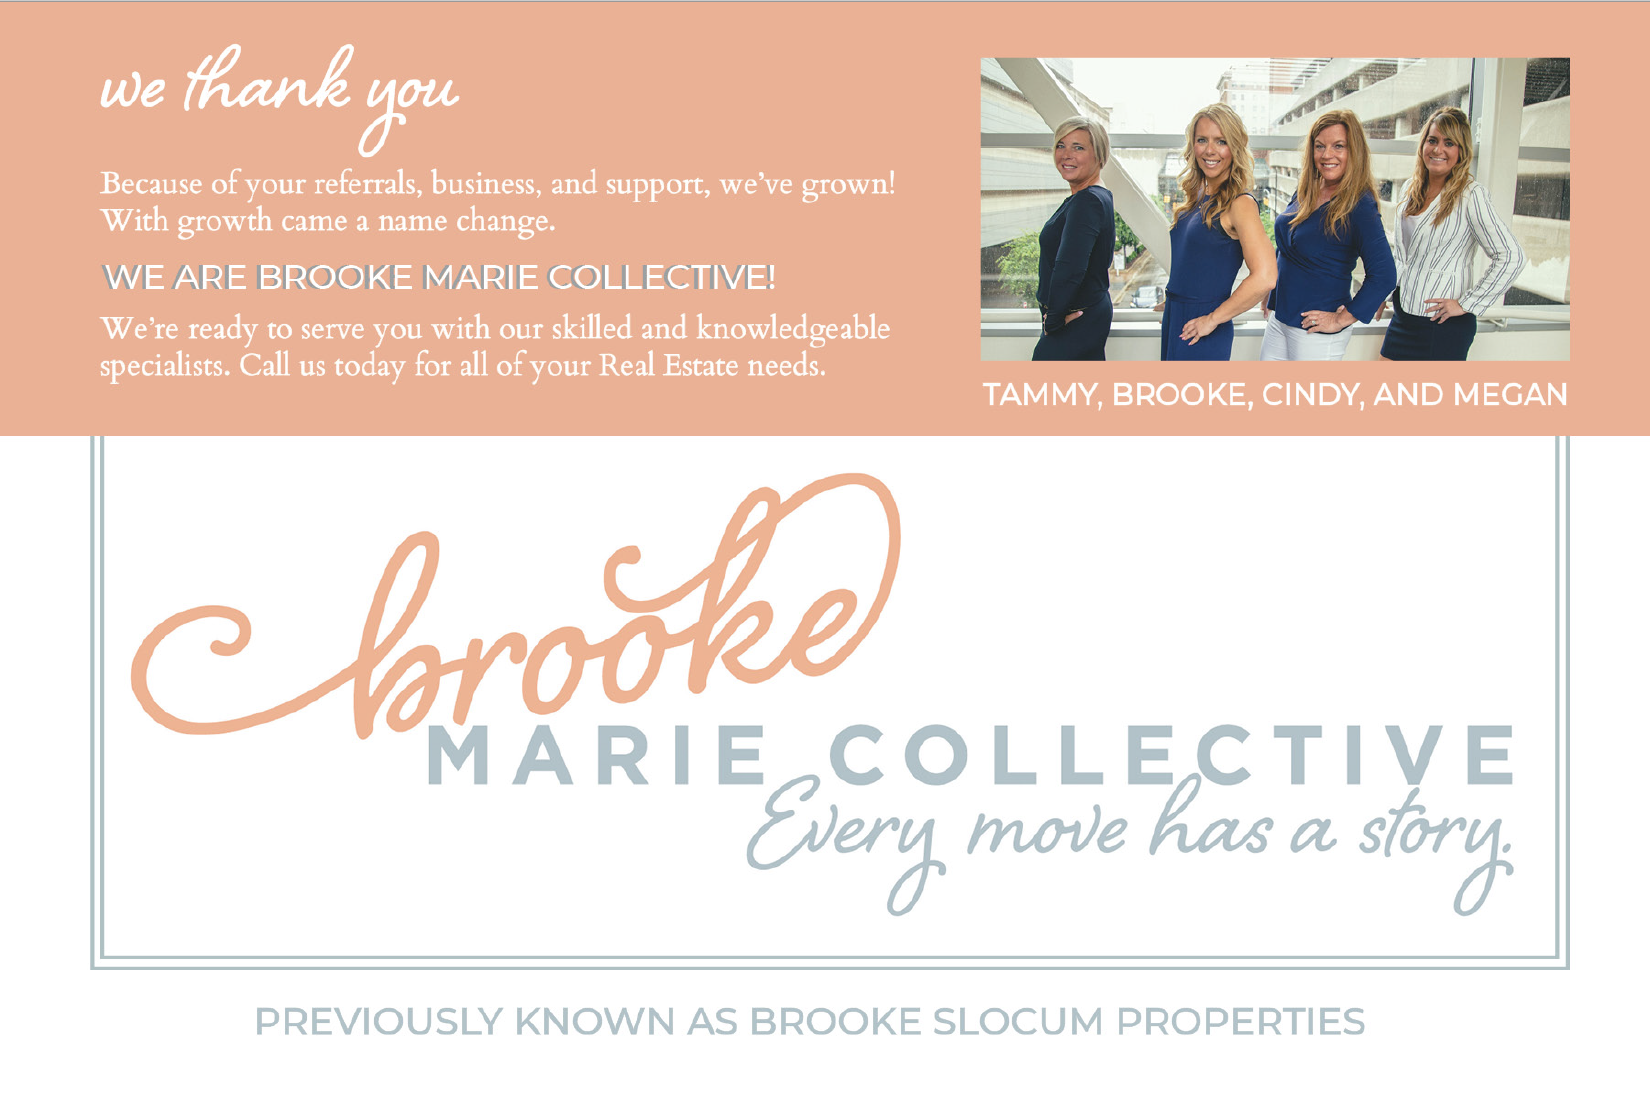 email blast for Brooke Marie Collective.